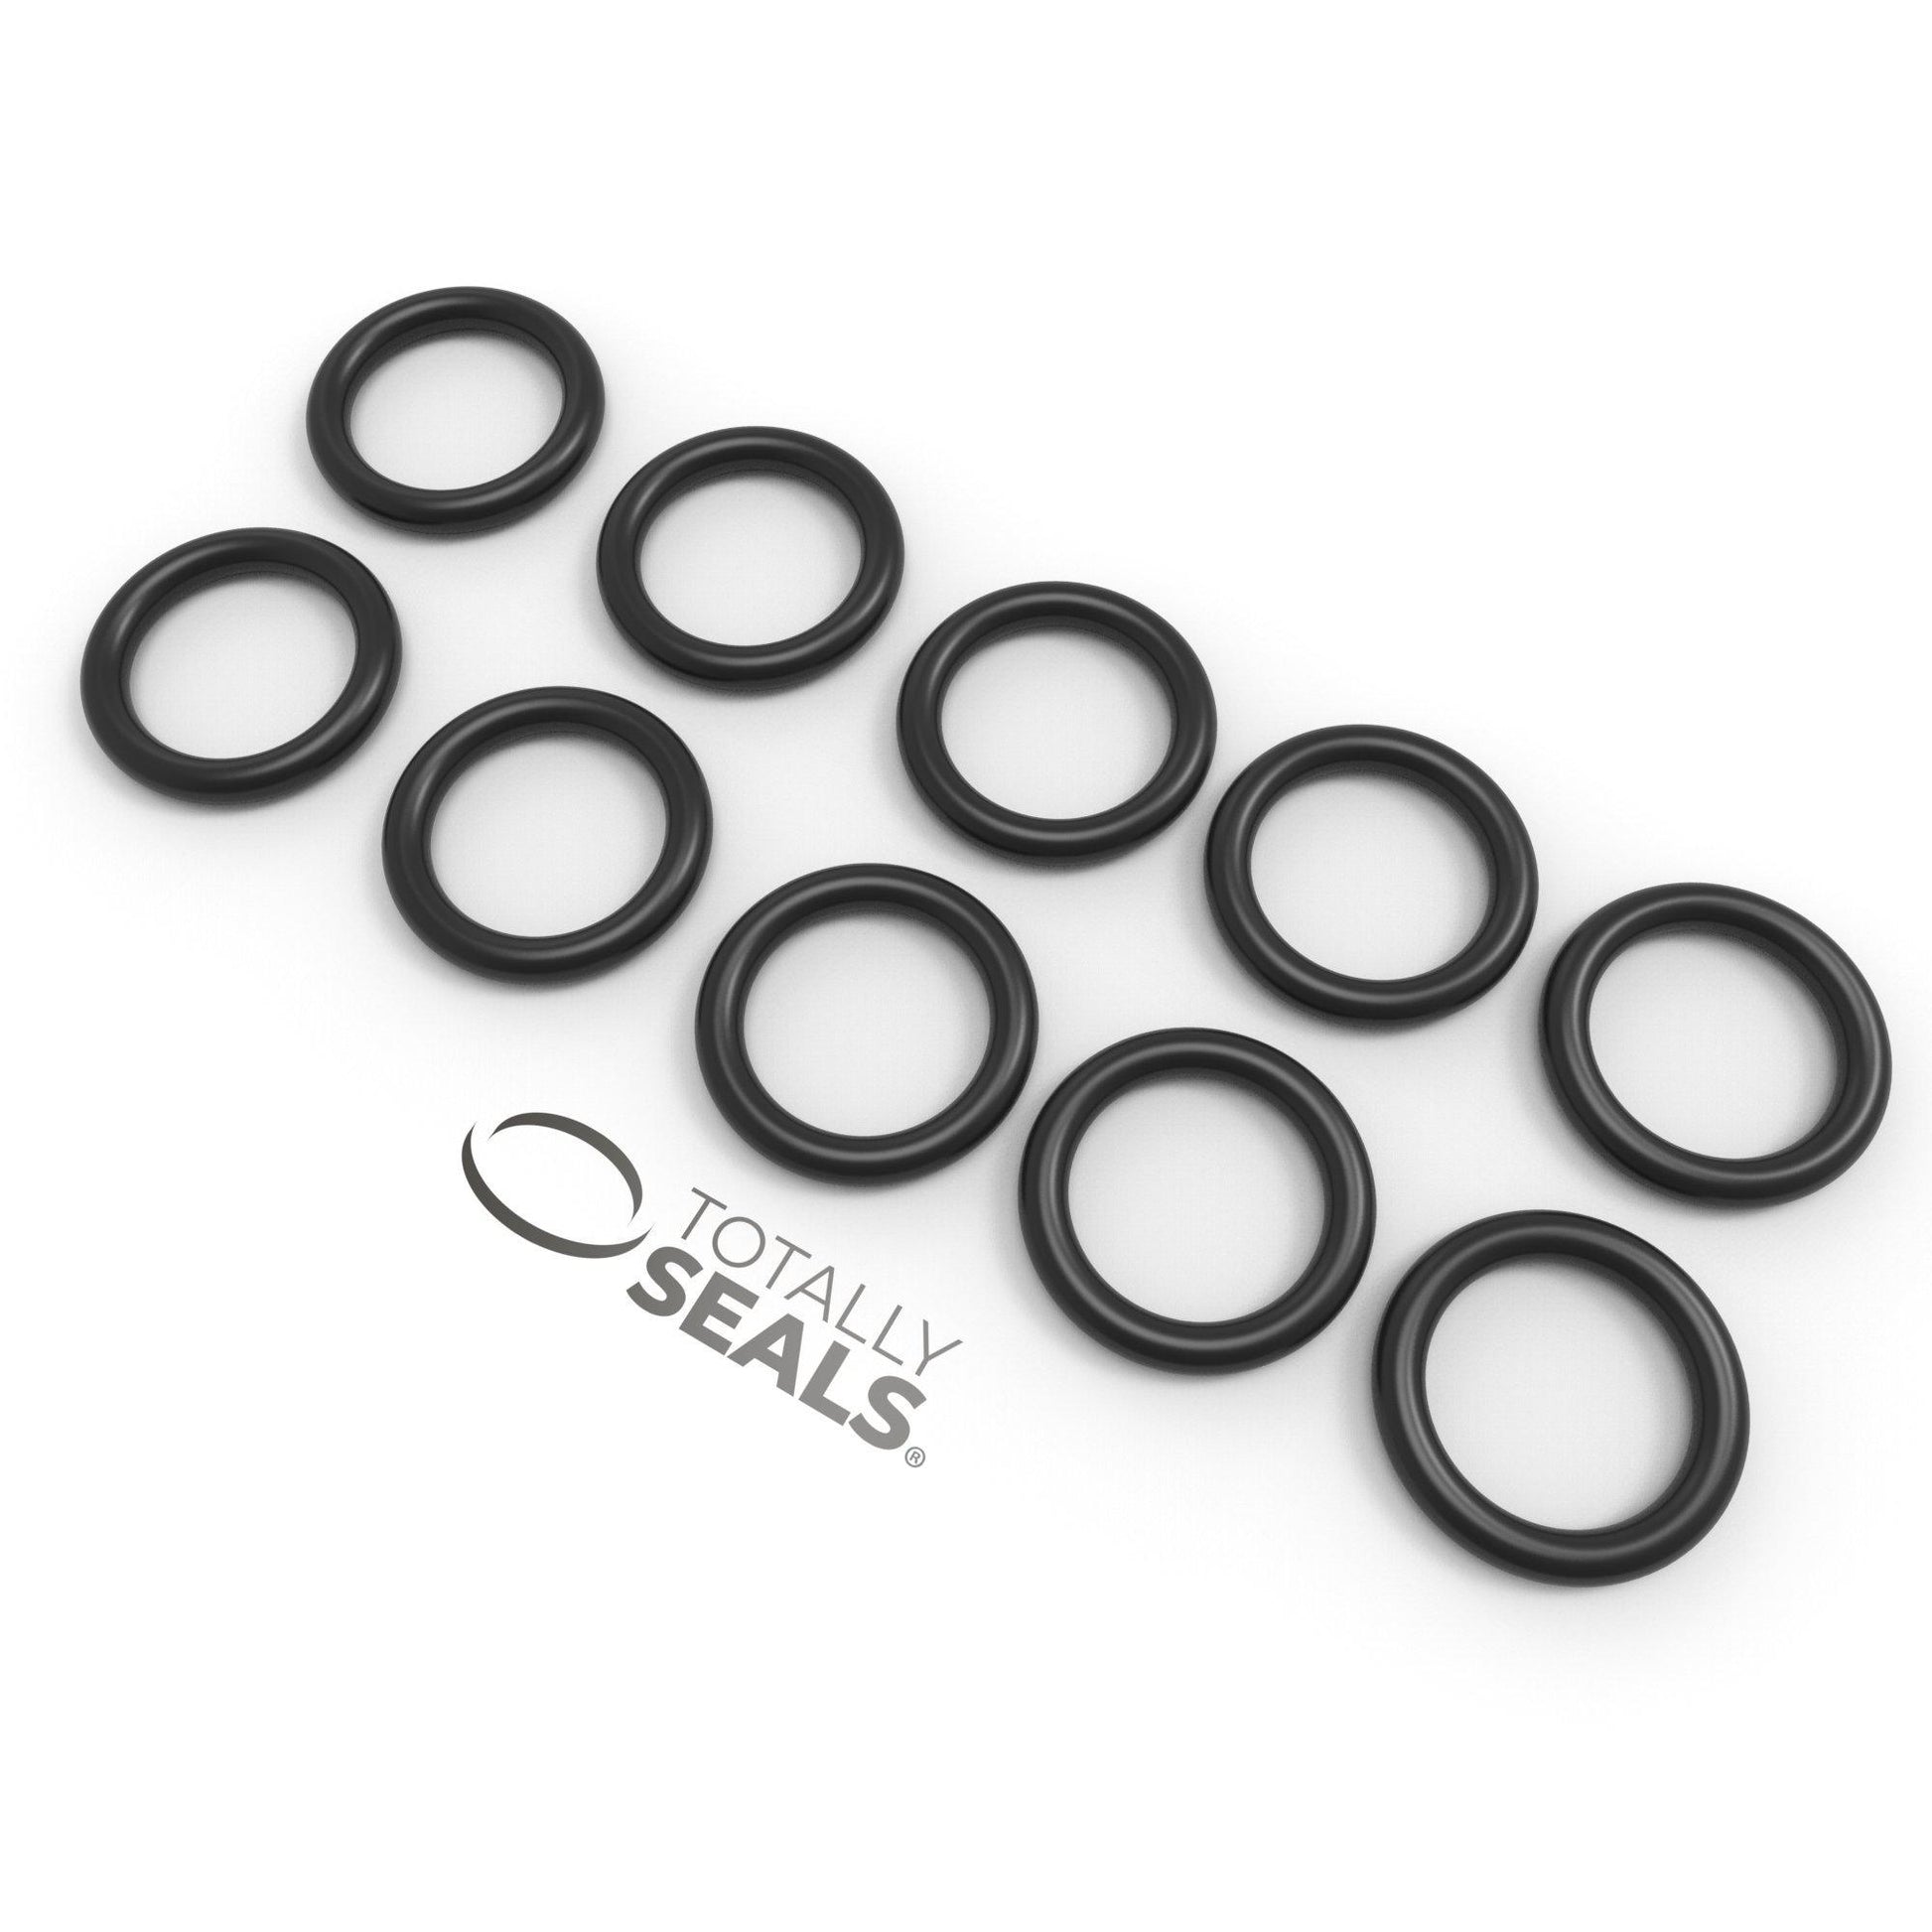 Uxcell O-Rings Nitrile Rubber 5mm x 7mm x 1mm Seal Rings Sealing Gasket 50pcs